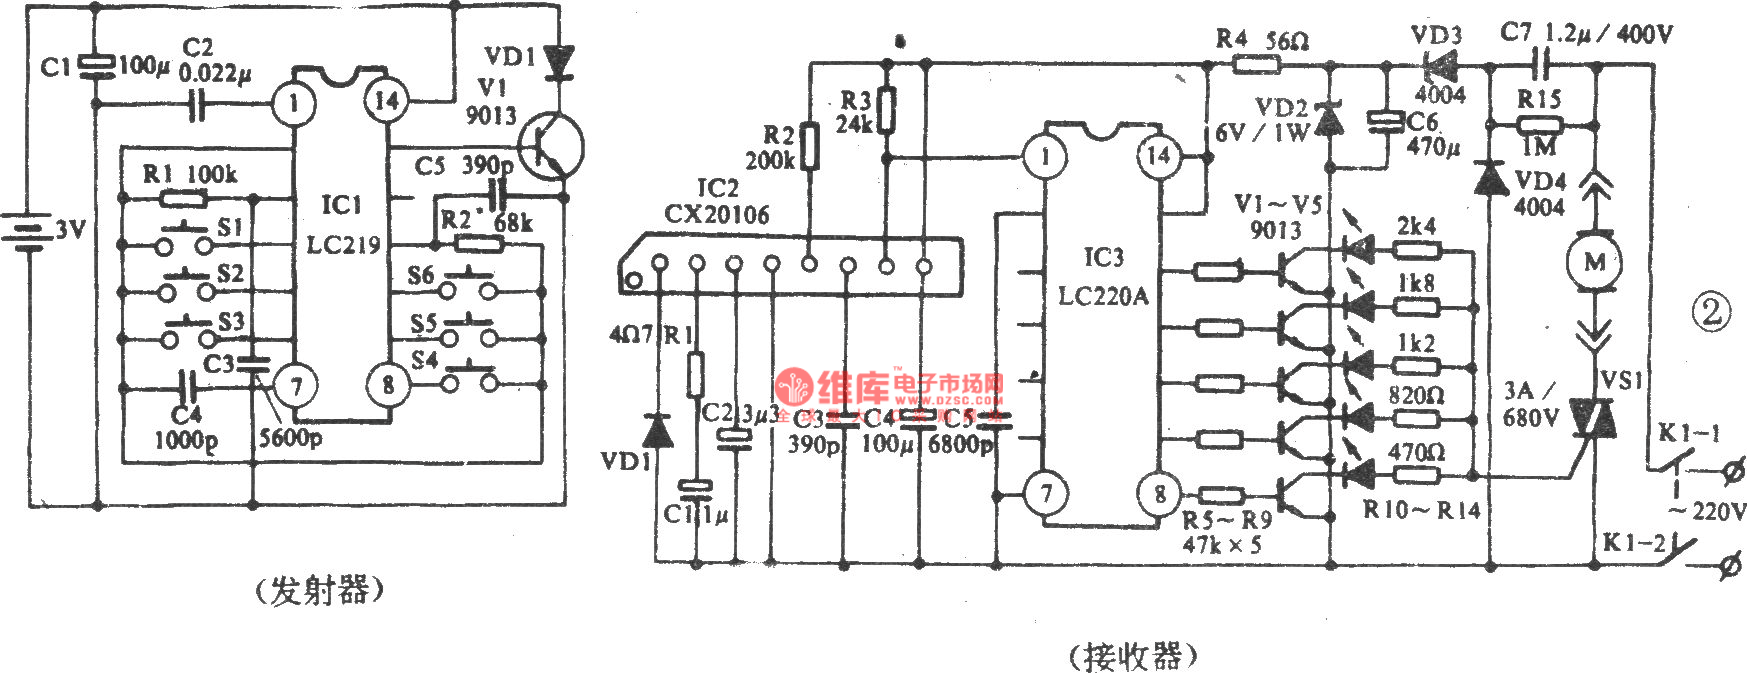 Ceiling Fan Infrared Remote Control Circuit 1 Remote Control Circuit Circuit Diagram Seekic Com